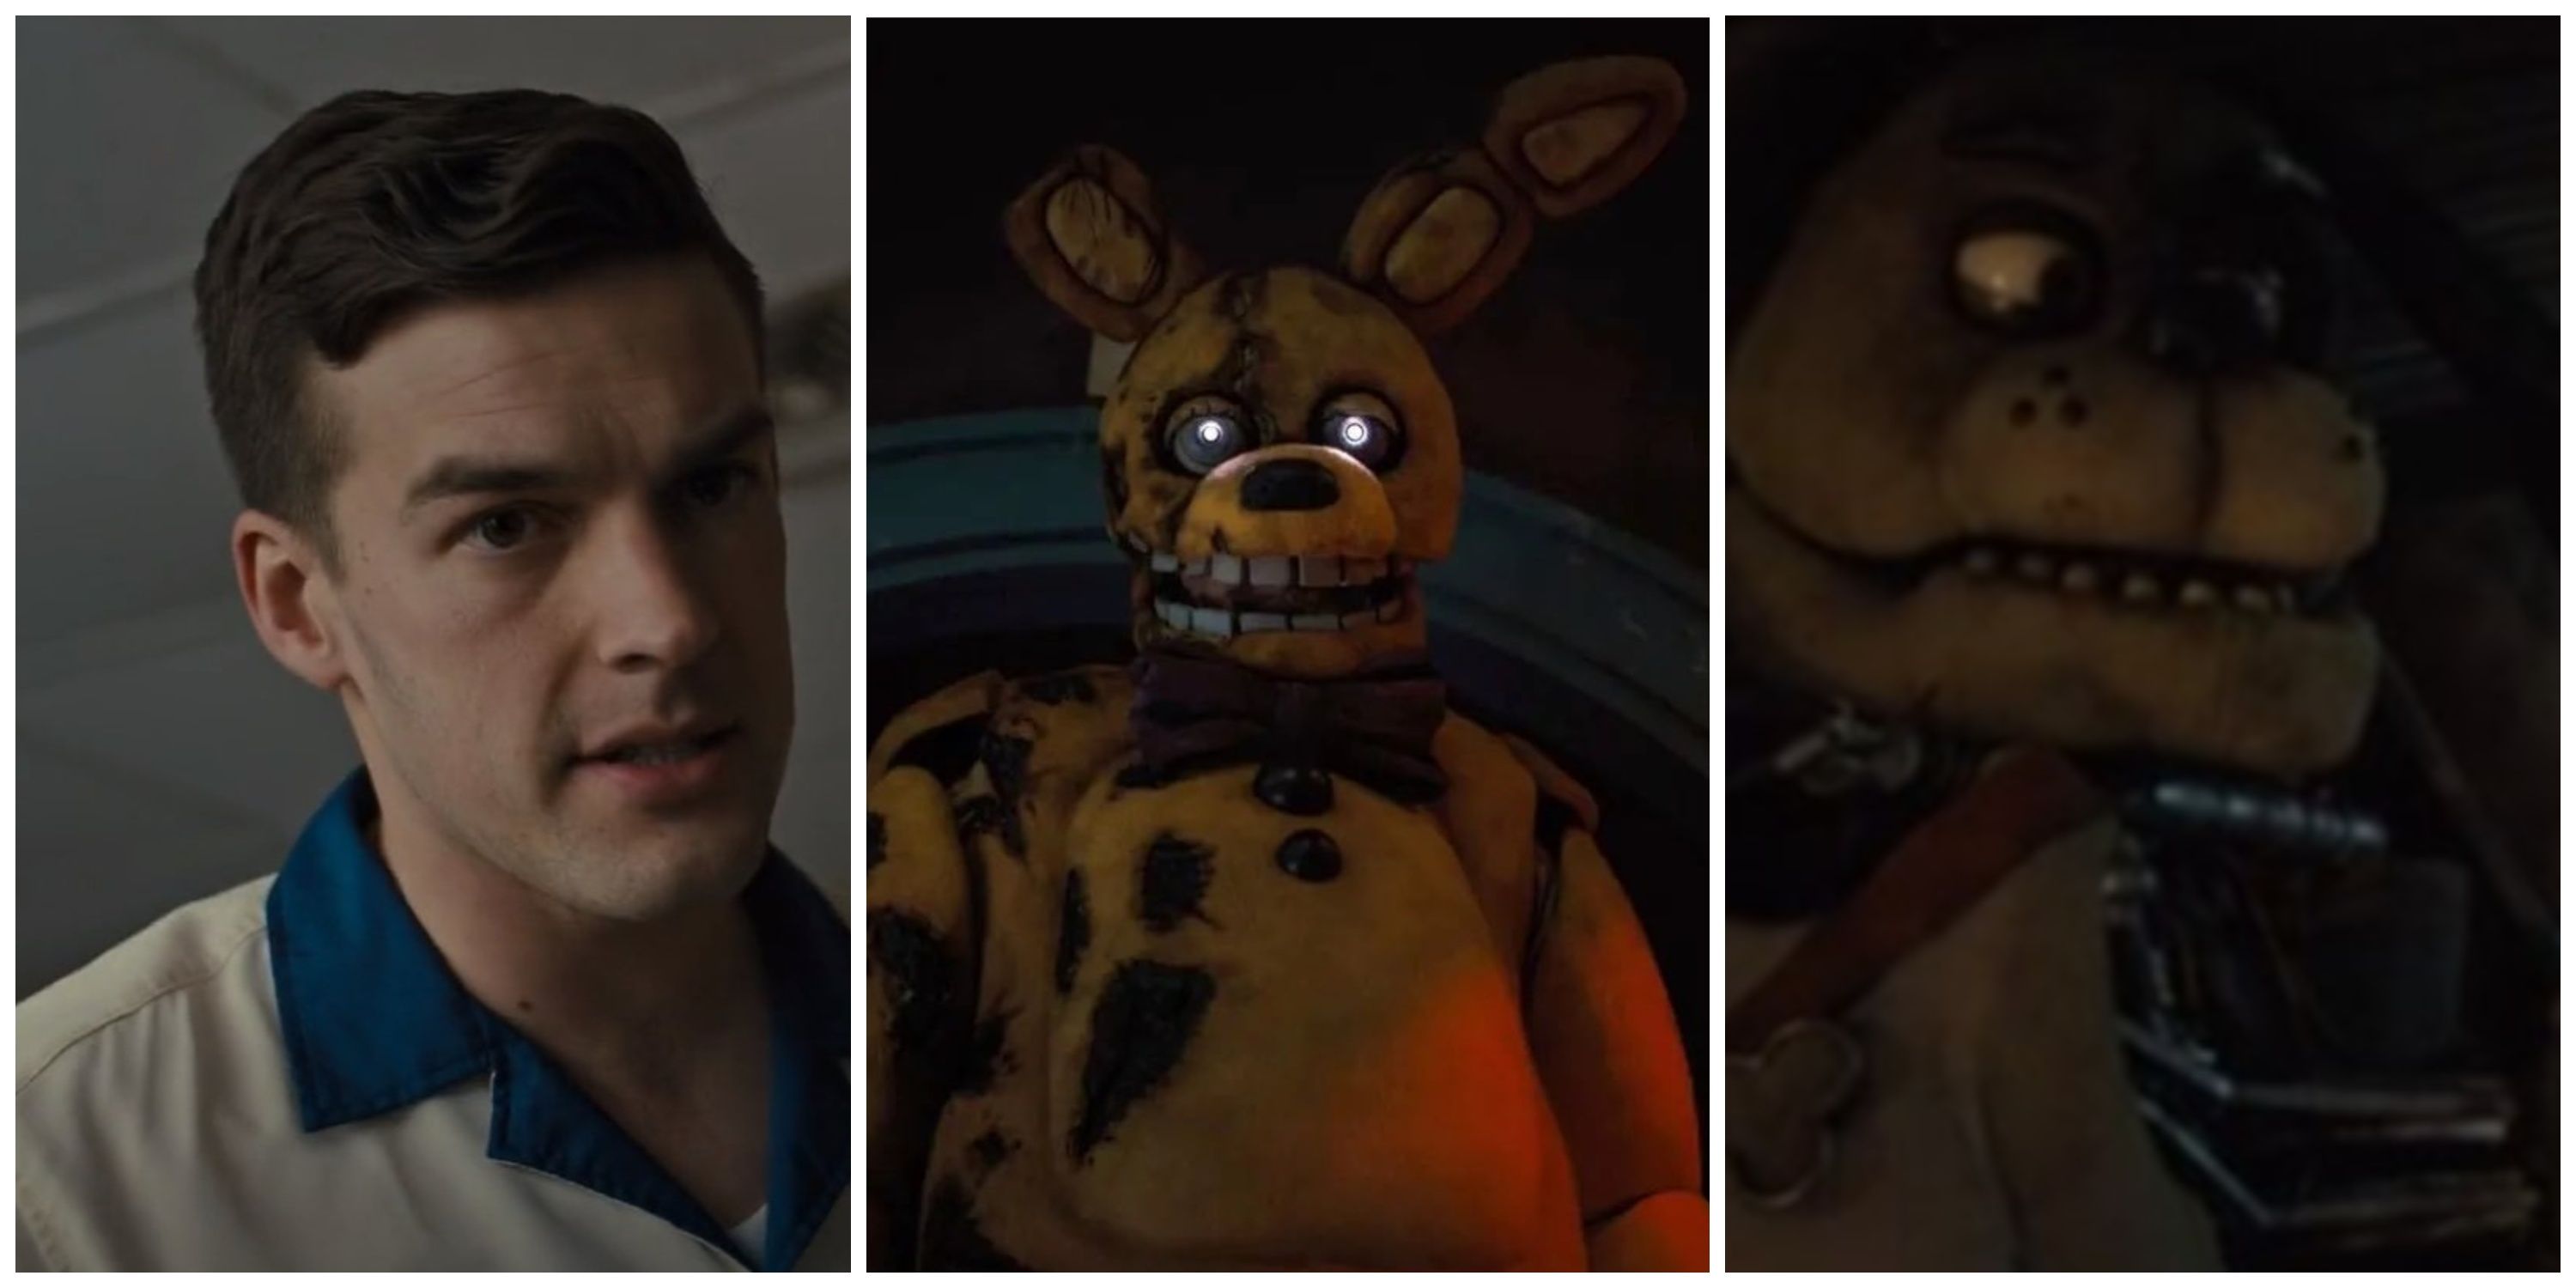 matpat as ness, william afton as springtrap/yellow rabbit, sparky the dog in fnaf movie